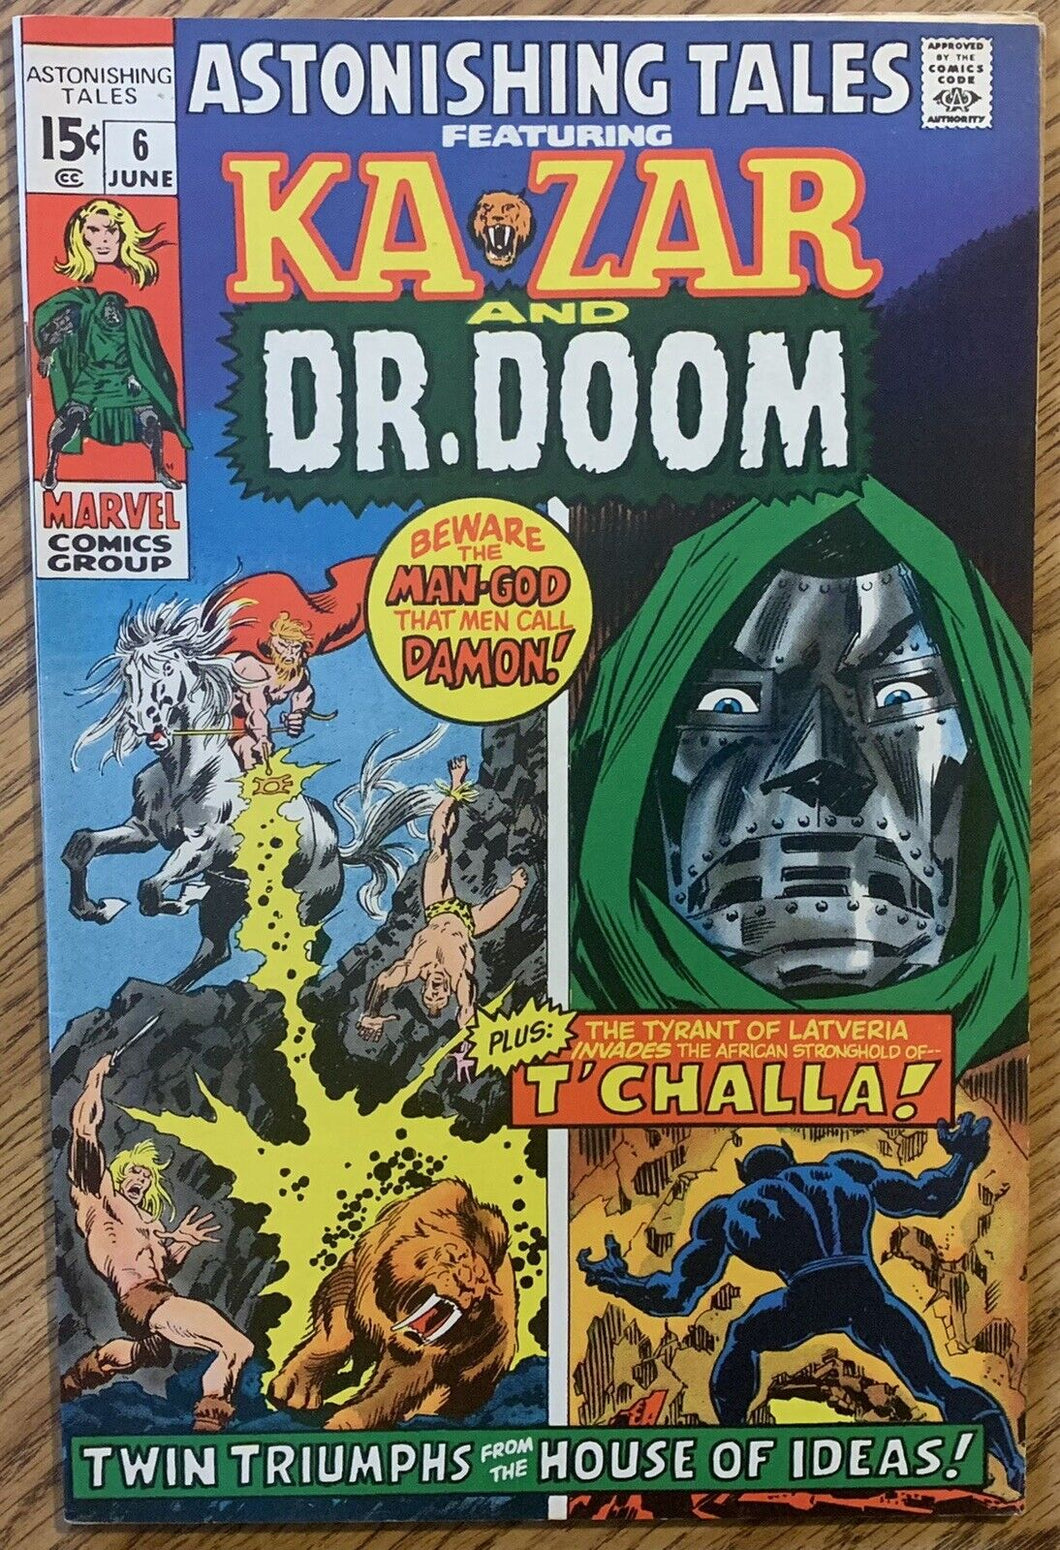 ASTONISHING TALES #6 (MARVEL,1971) Doctor Doom and Ka-Zar stories. Black Panther appearance.